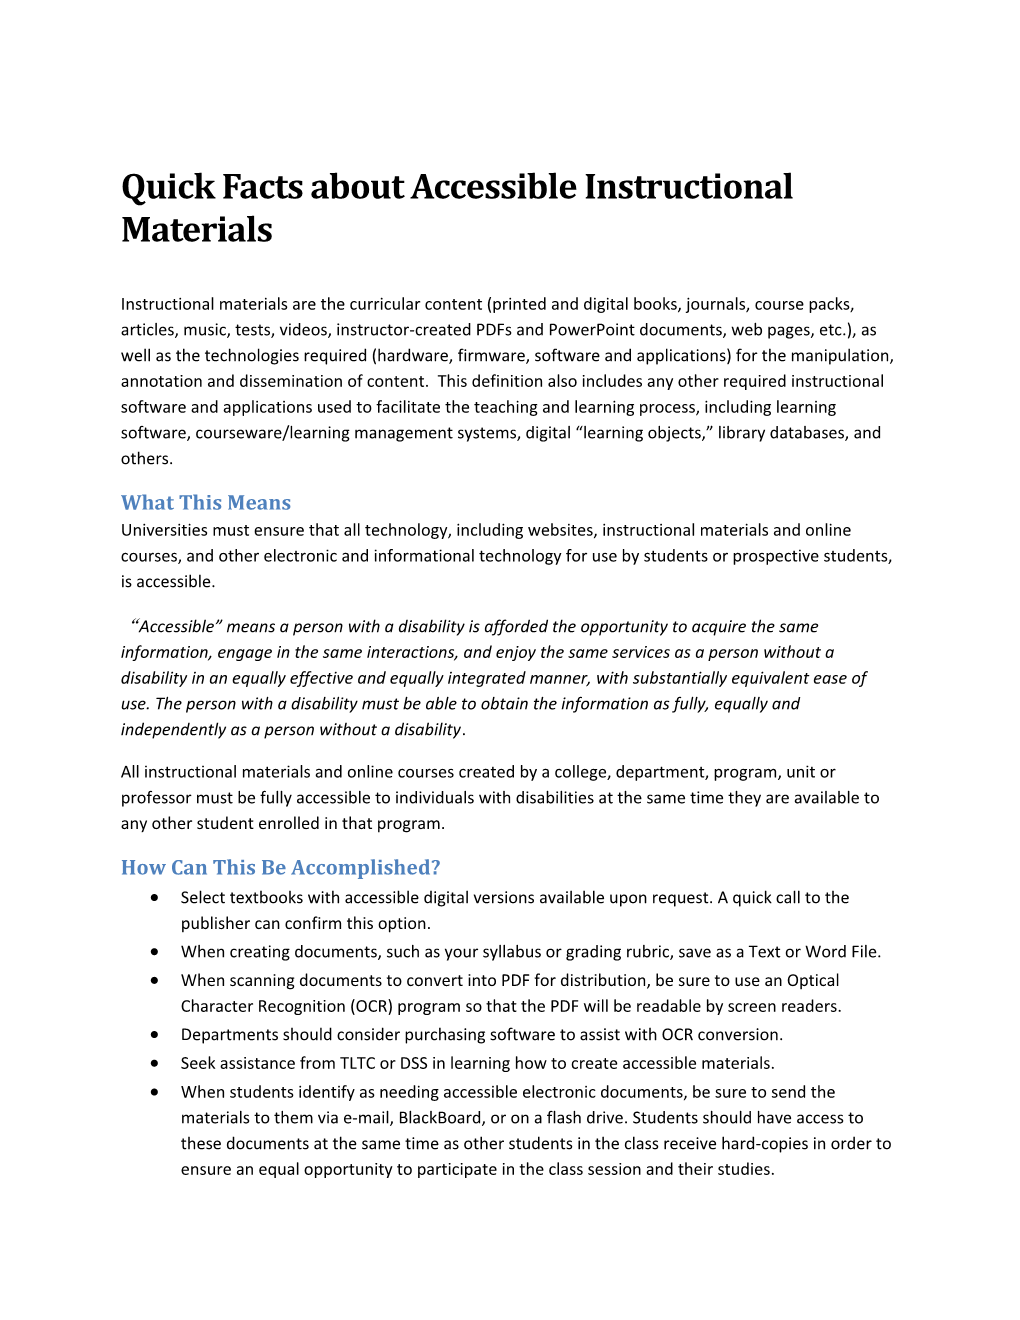 Quick Facts About Accessible Instructional Materials